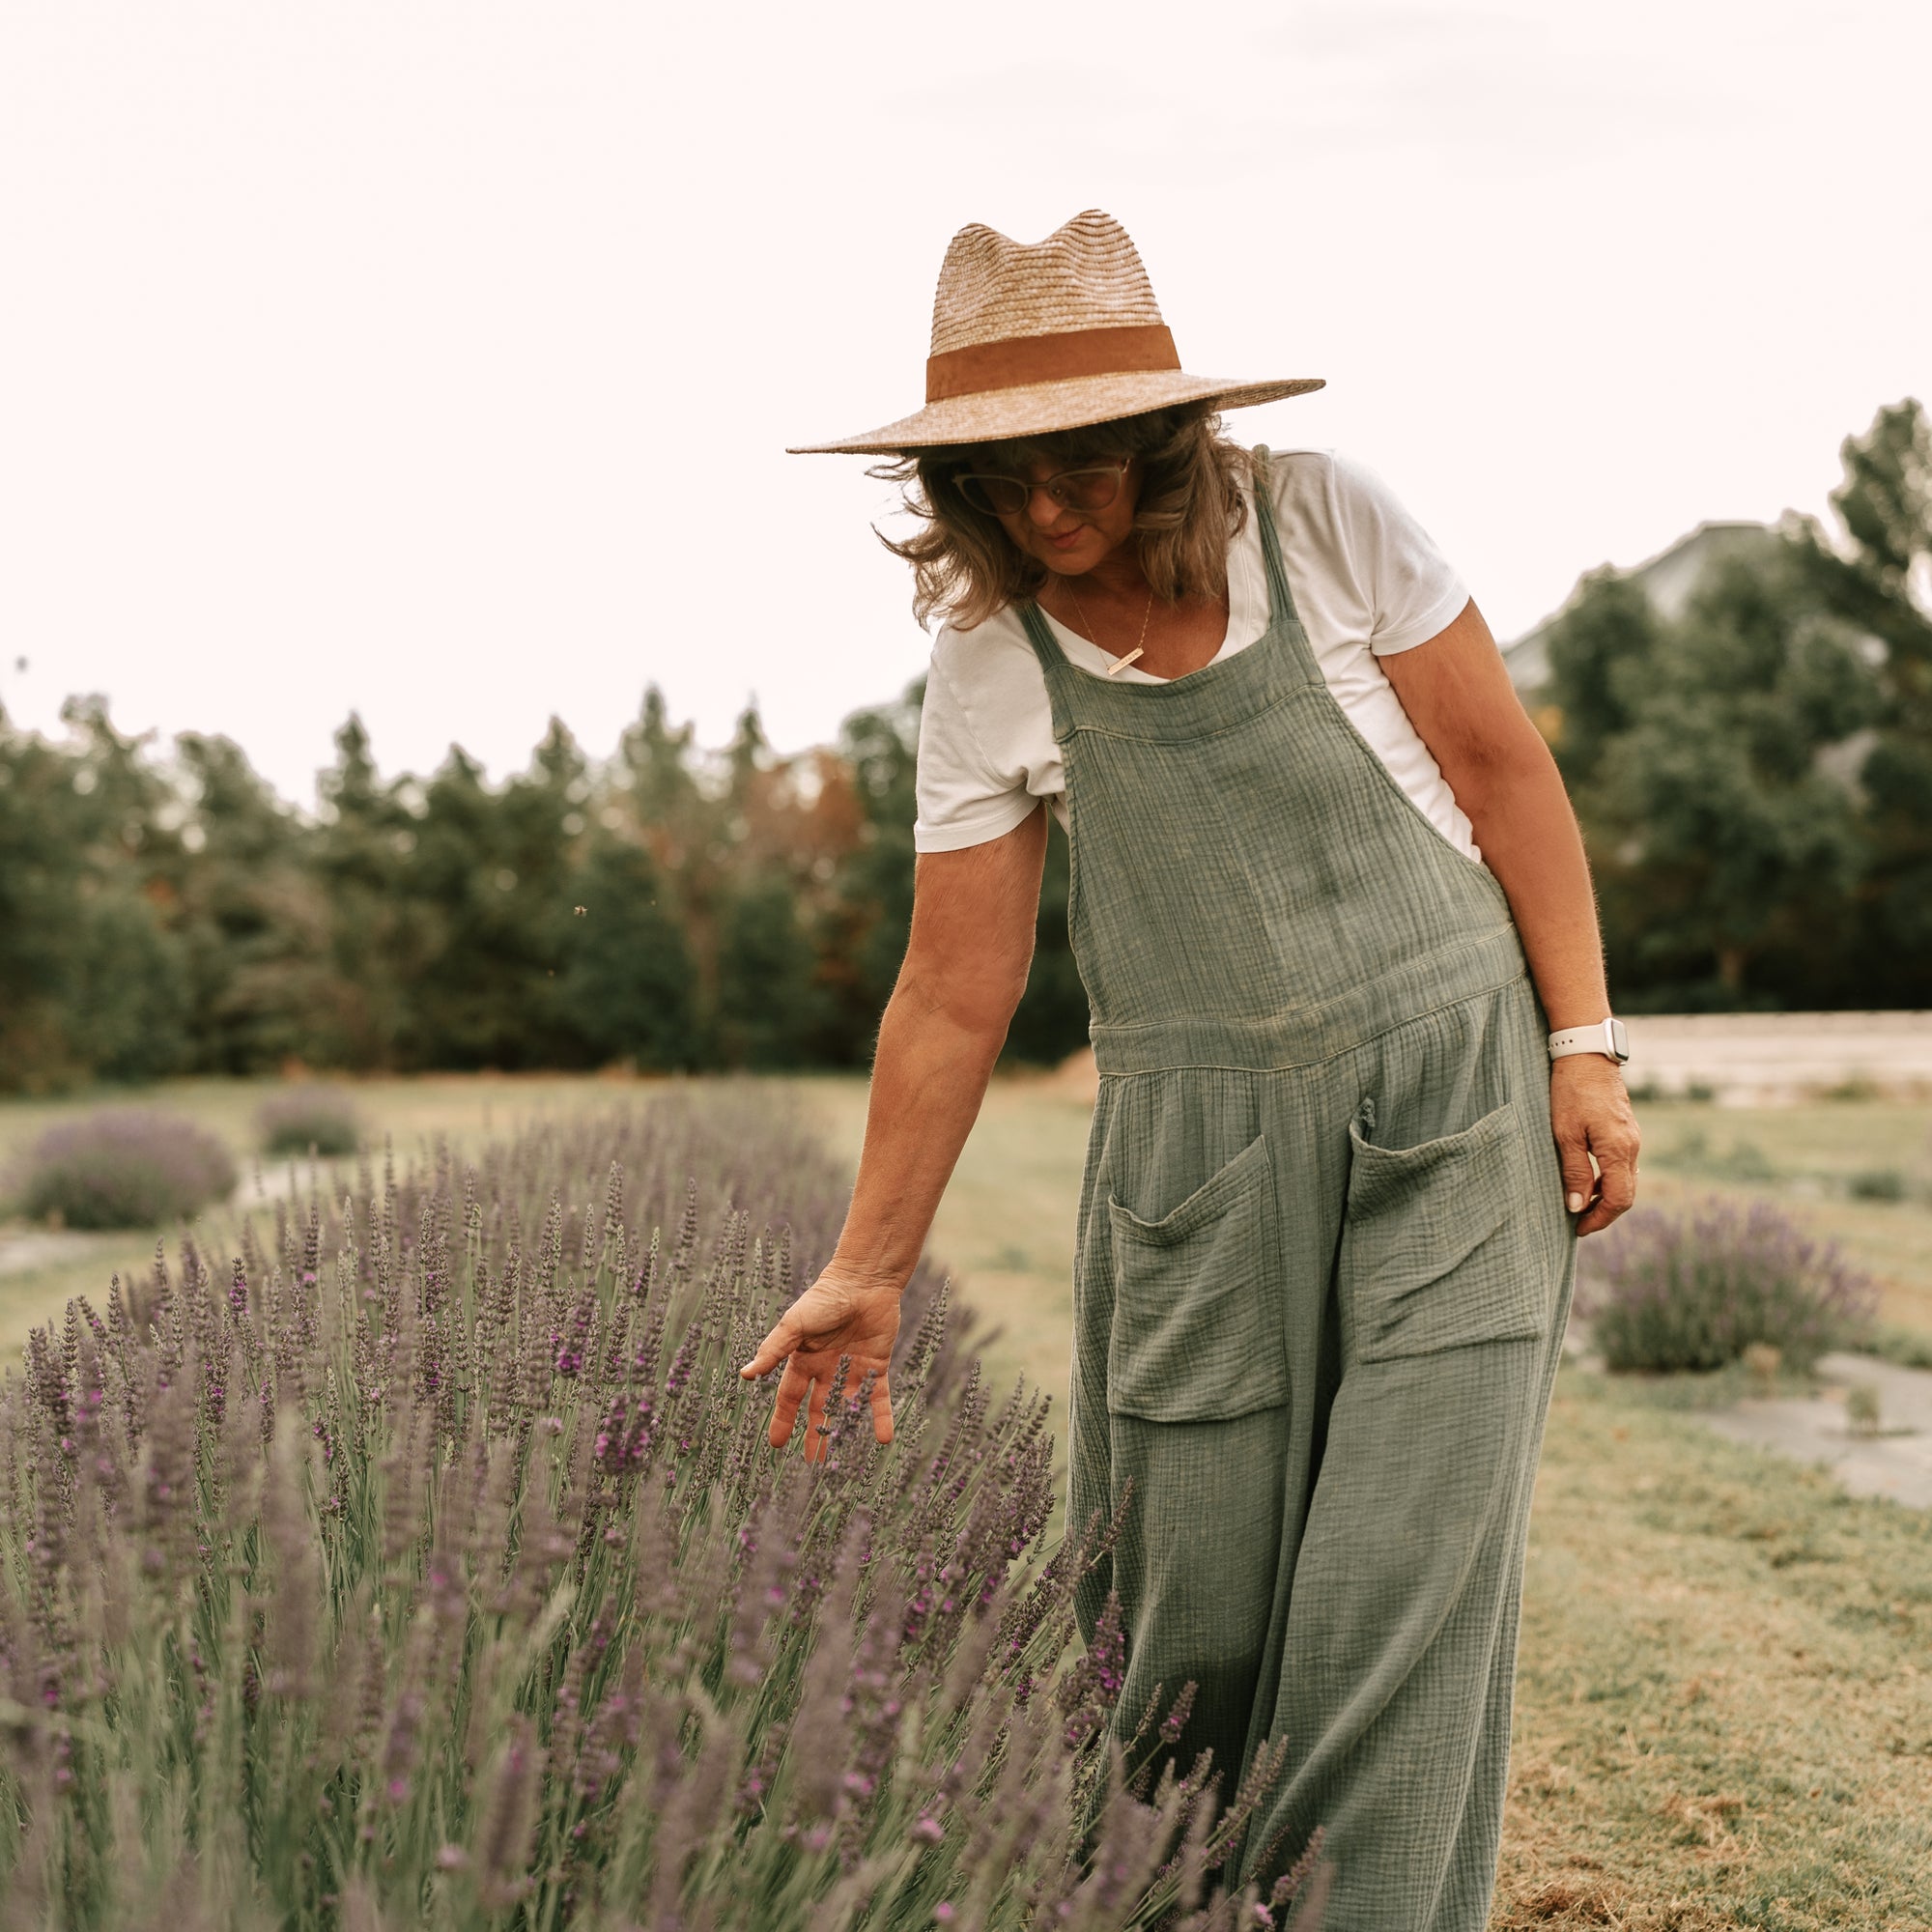 THE BENEFITS OF LAVENDER